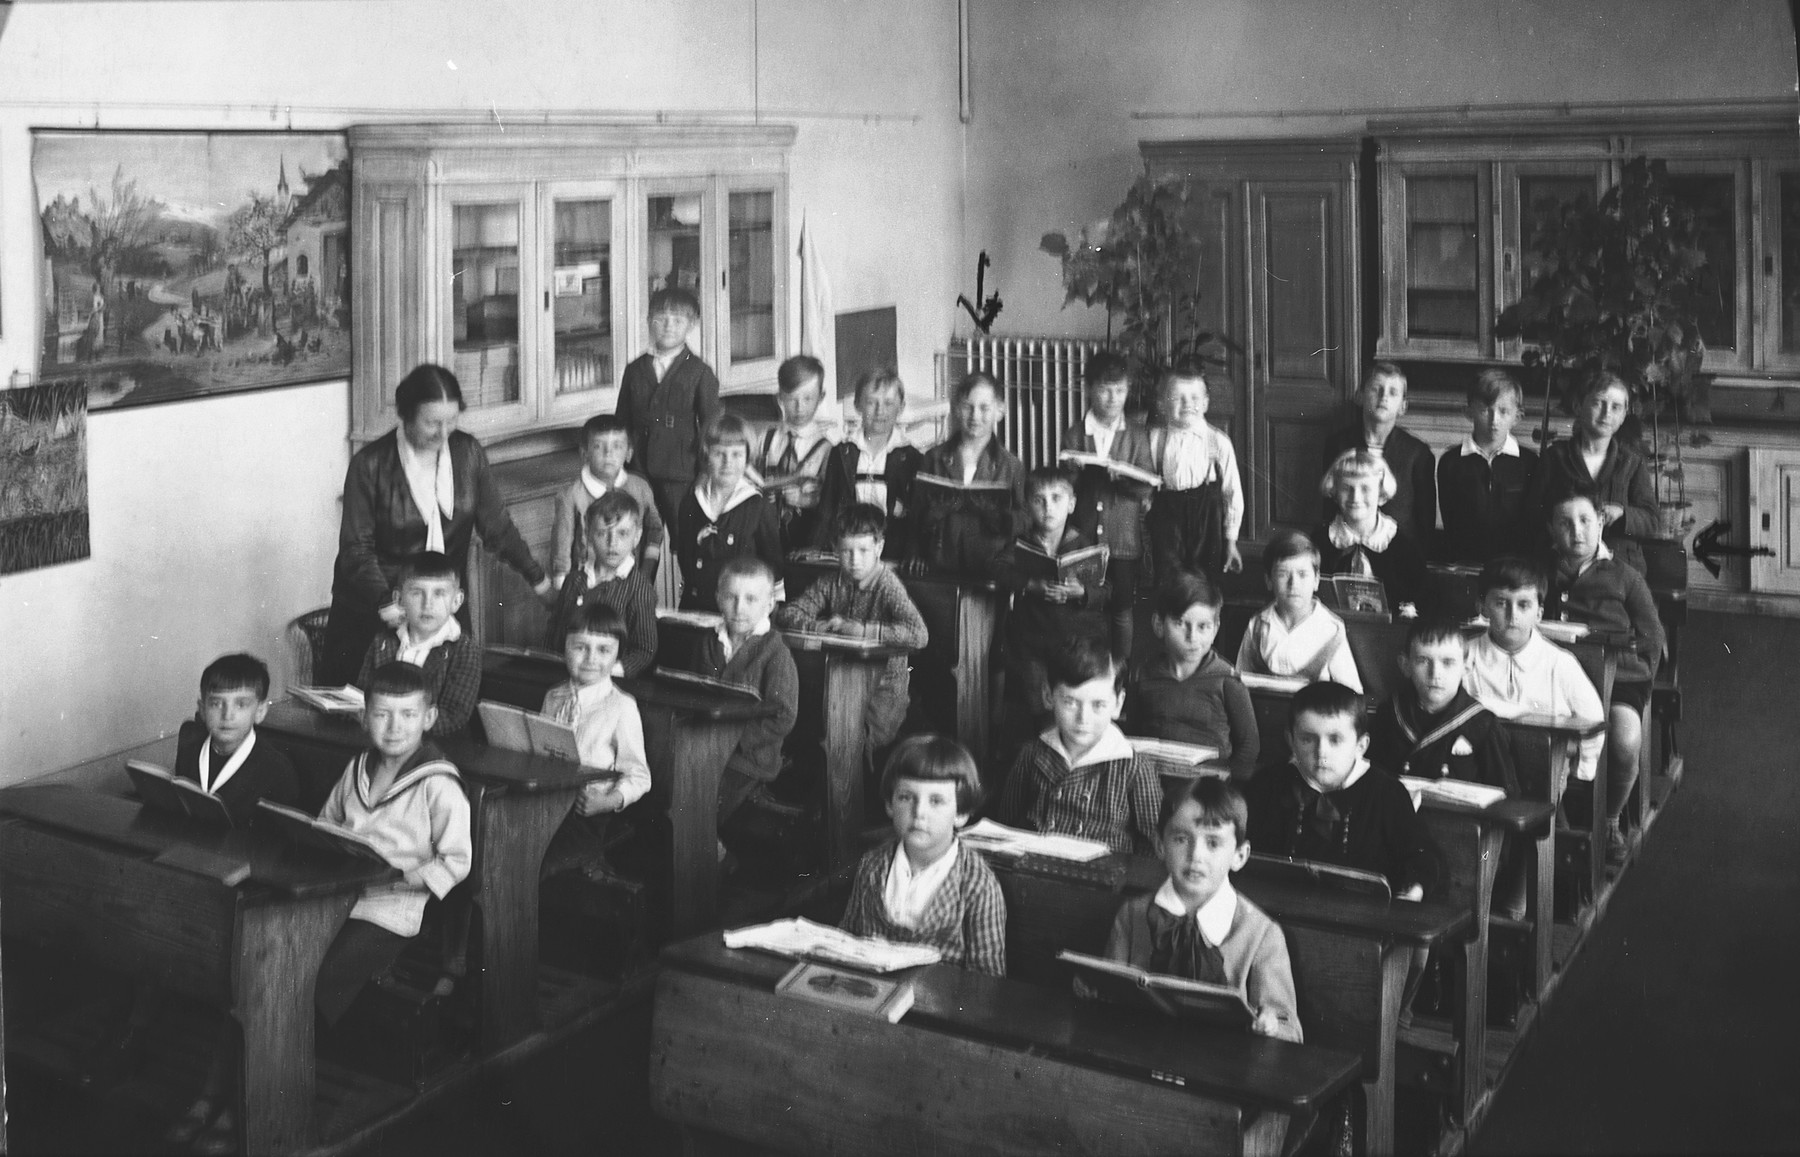 Pupils in the first grade sit in their classroom at a public school in Prague.  Among the students are several Jewish children.

Among those pictured are Edgar Krasa (back row, left) and Max Widder (second to last row, right side).